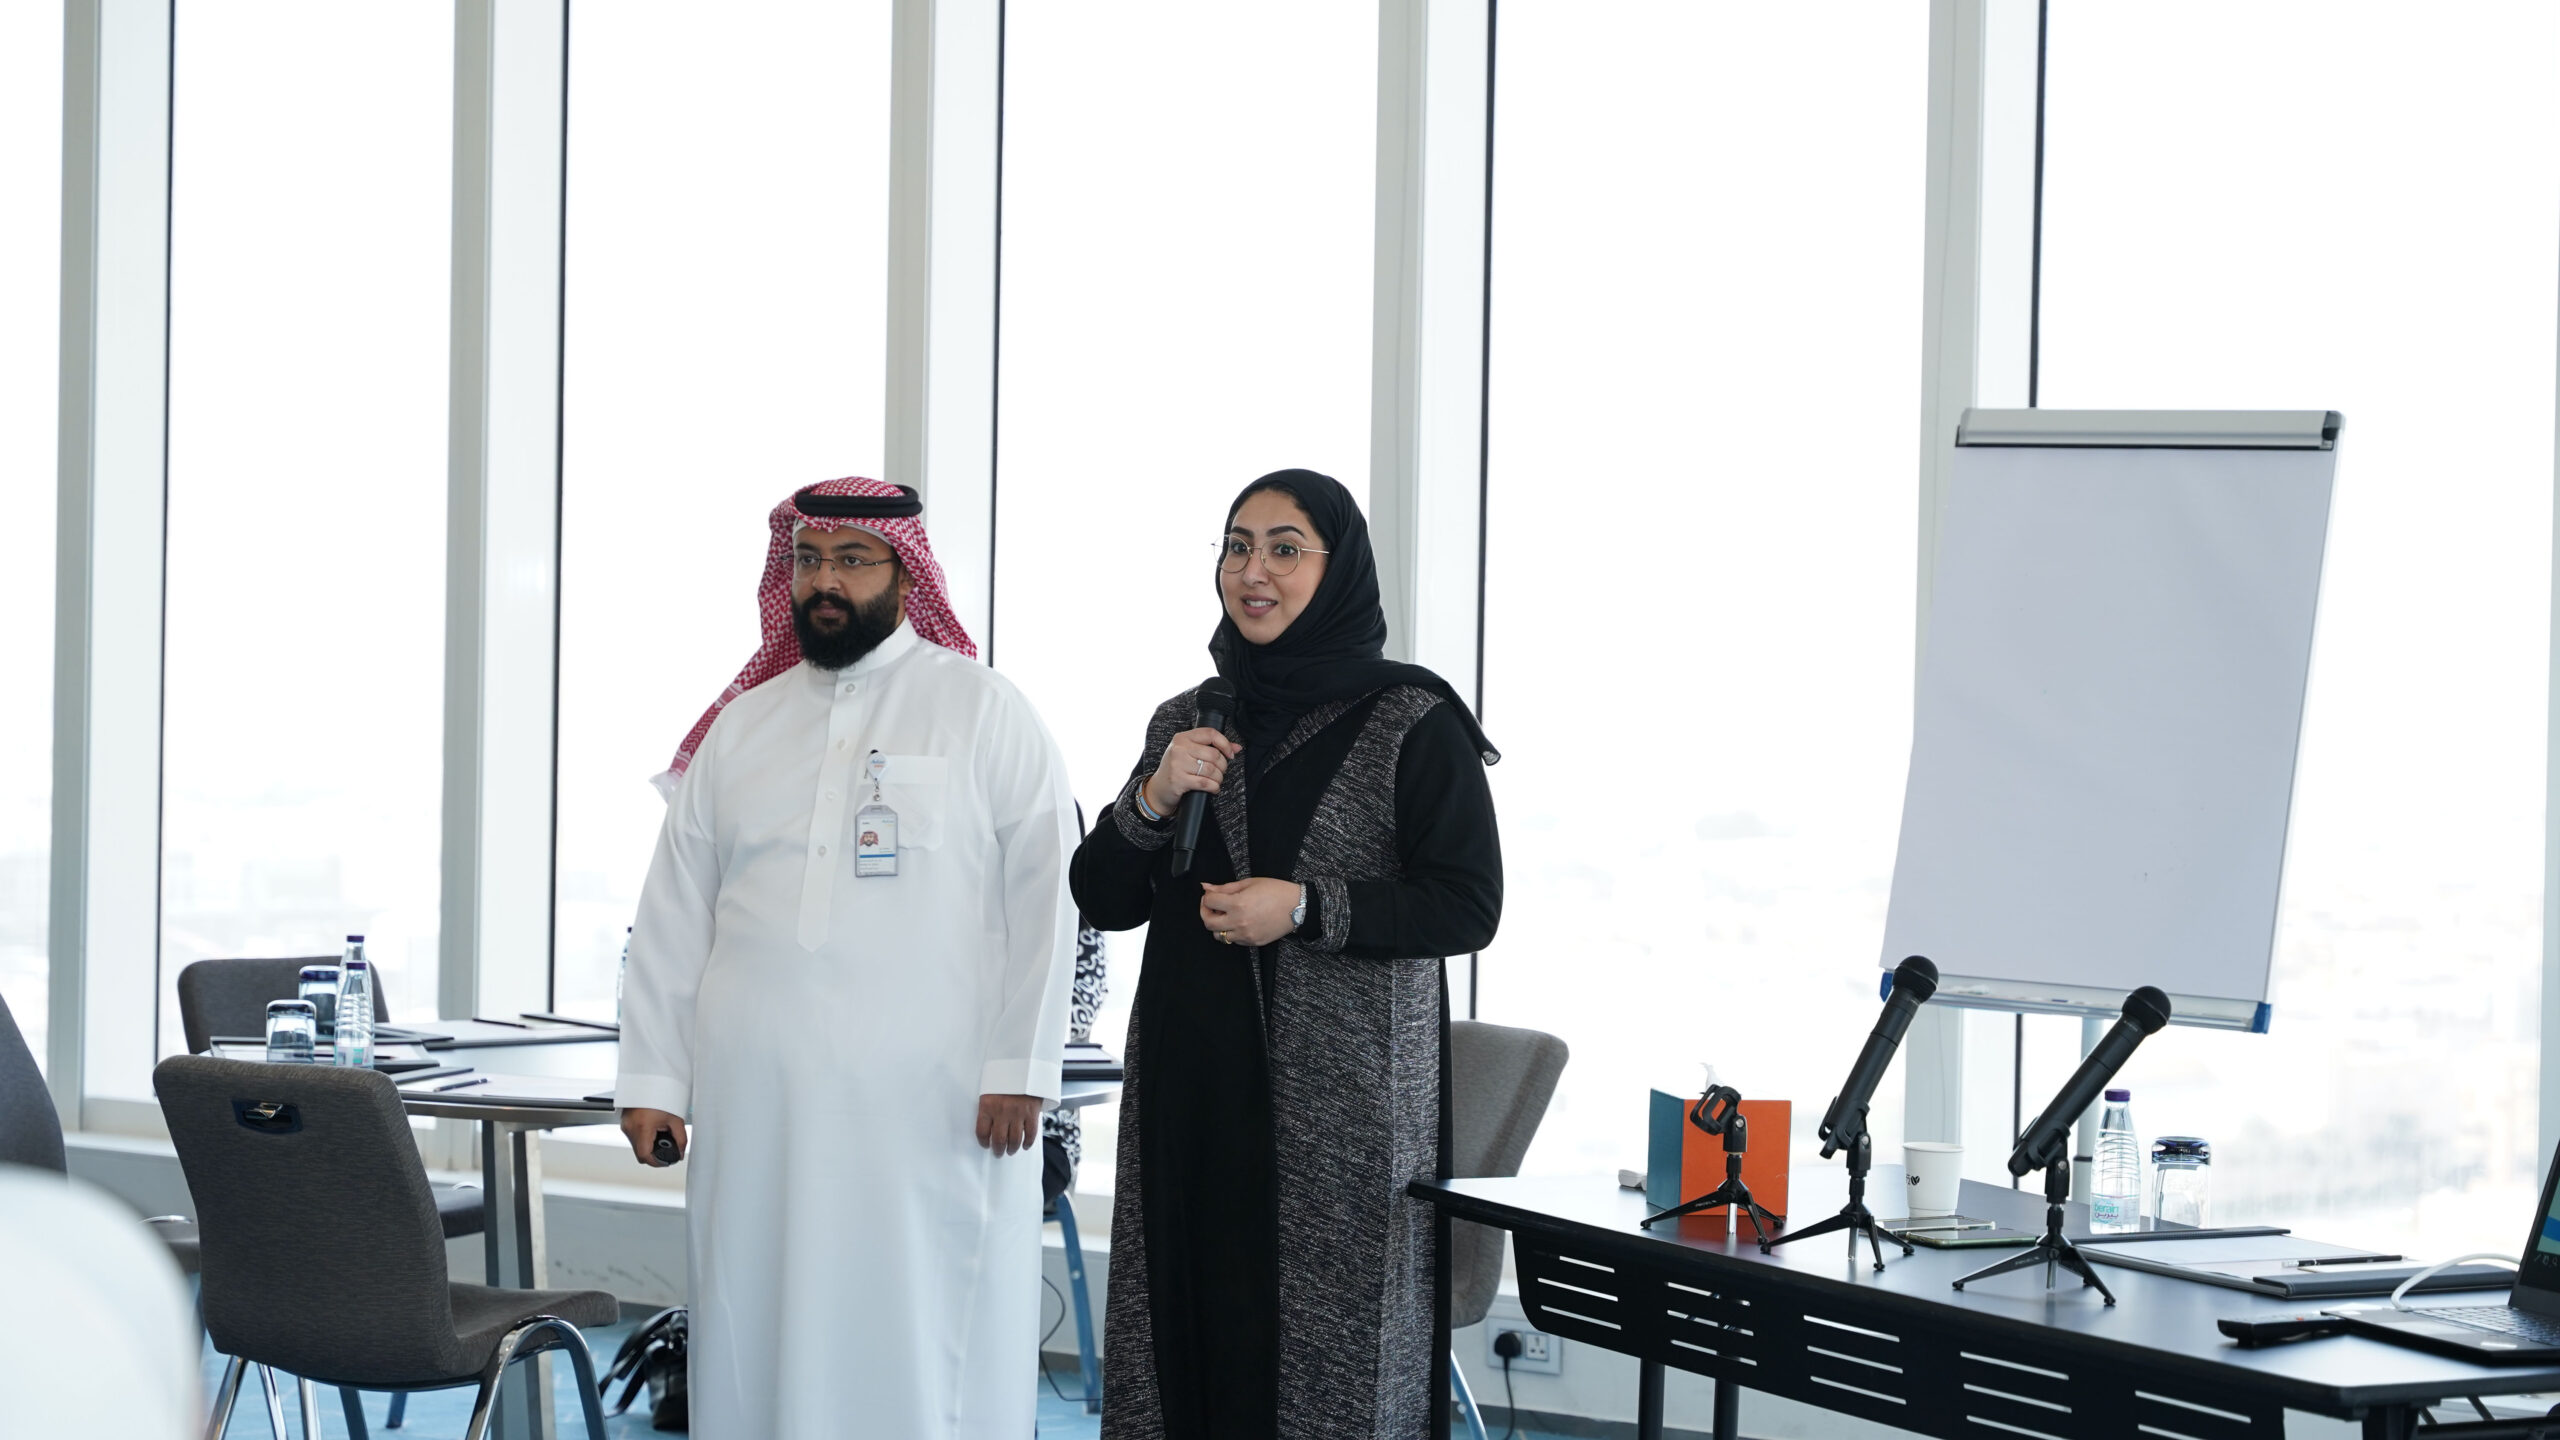 The Pearl Initiative and SABIC Join Forces to Provide Female Business Leaders a Unique Gender and Corruption Training in Saudi Arabia and the UAE